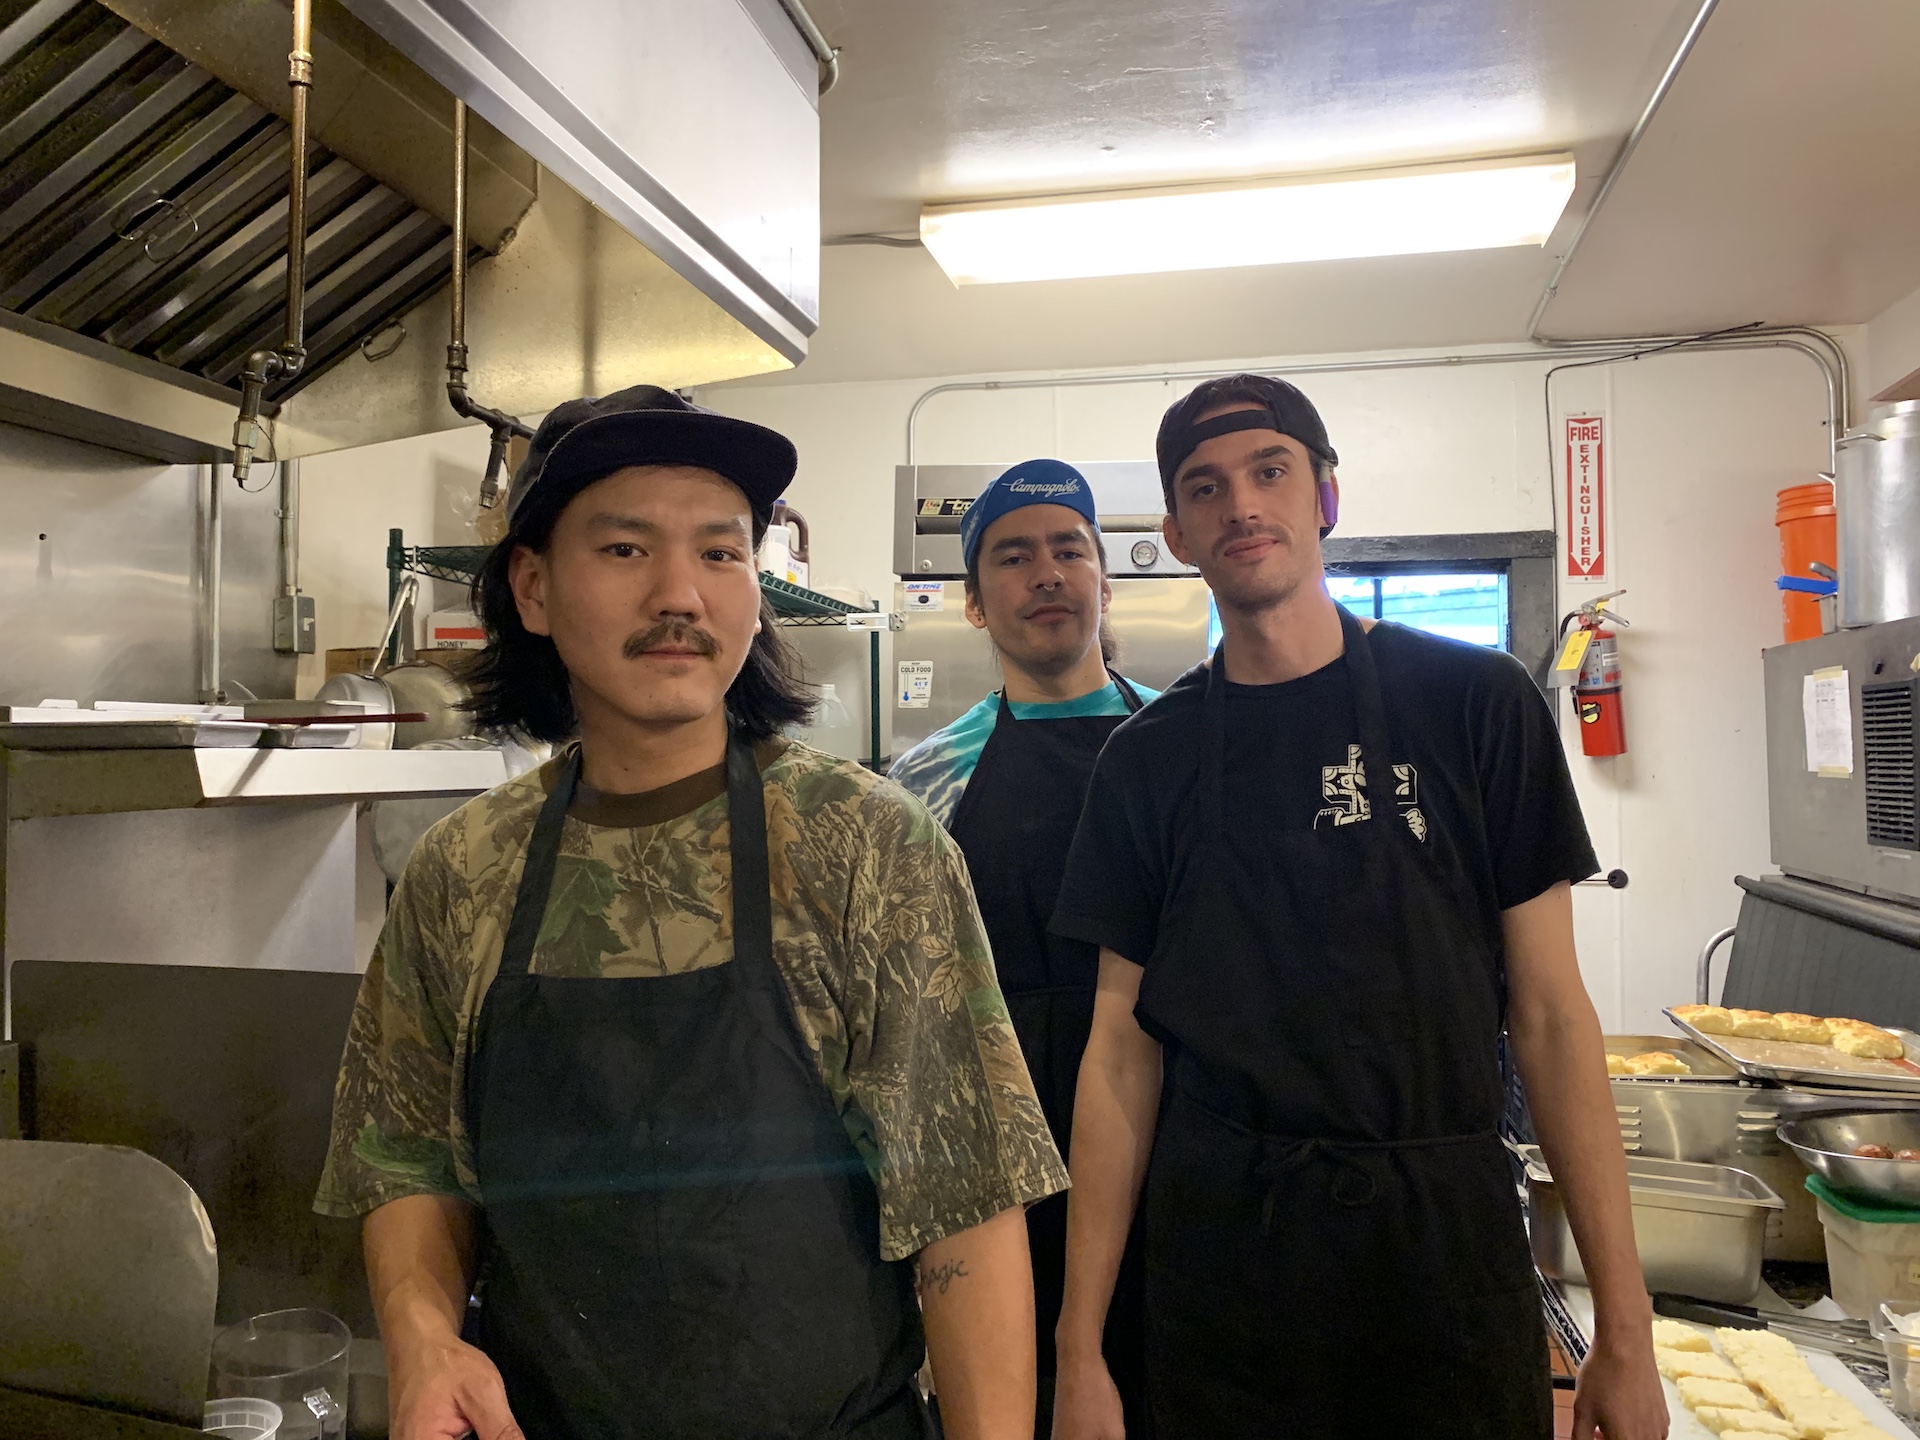 Lovely's chef Mikey Yoon along with Javi Palacios and Cameron Kauzer working a pop-up at Eli's Mile High Club.